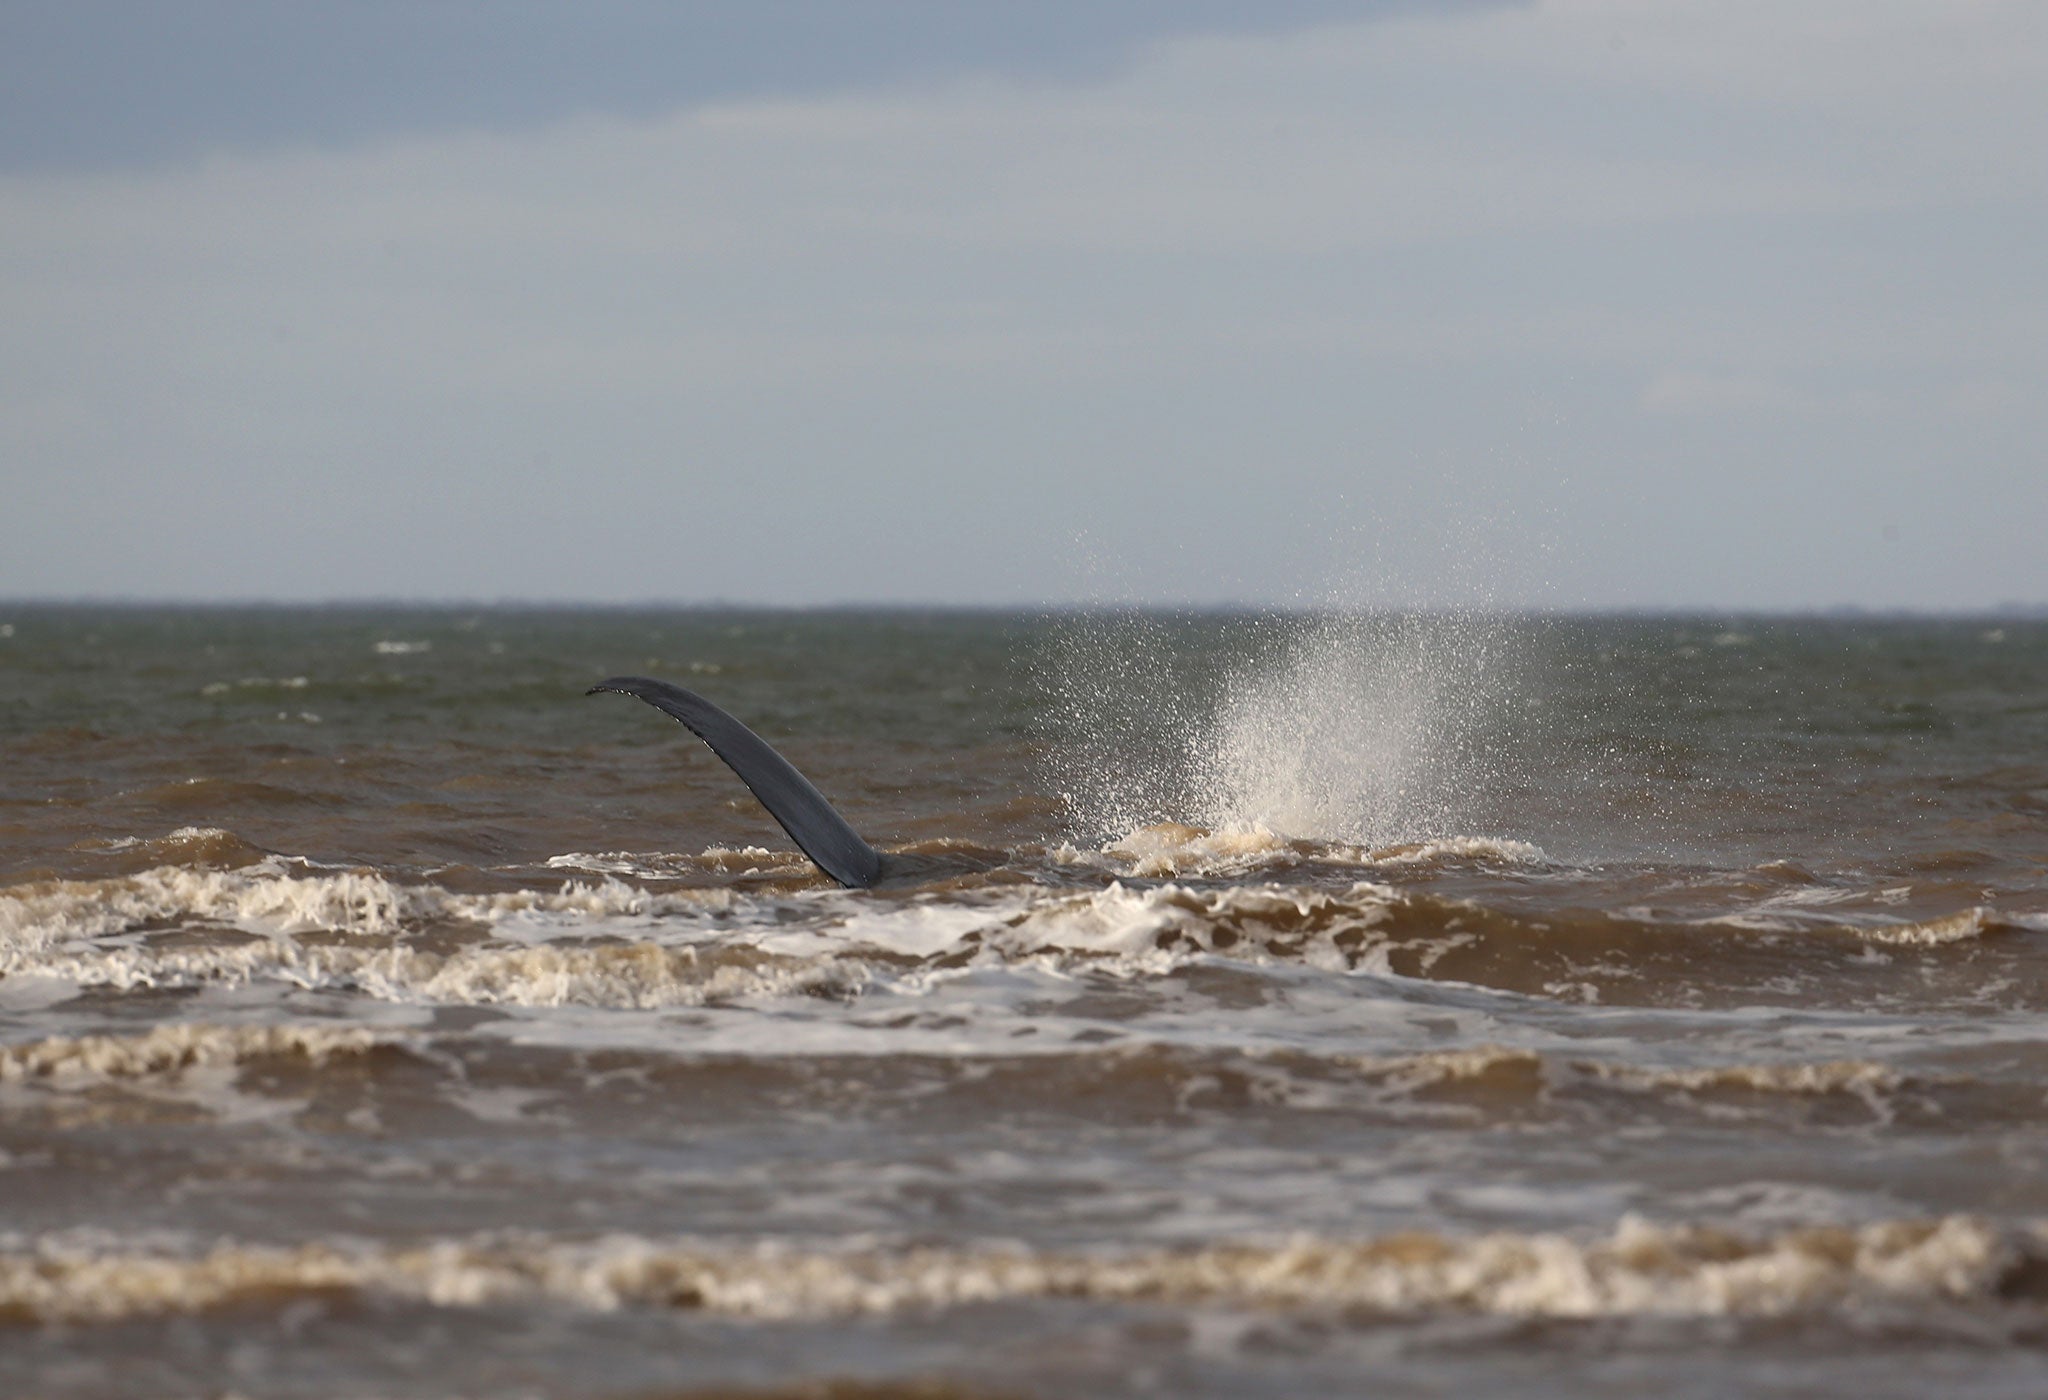 It came after another whale was stranded in Hunstanton and several others beached on British beaches